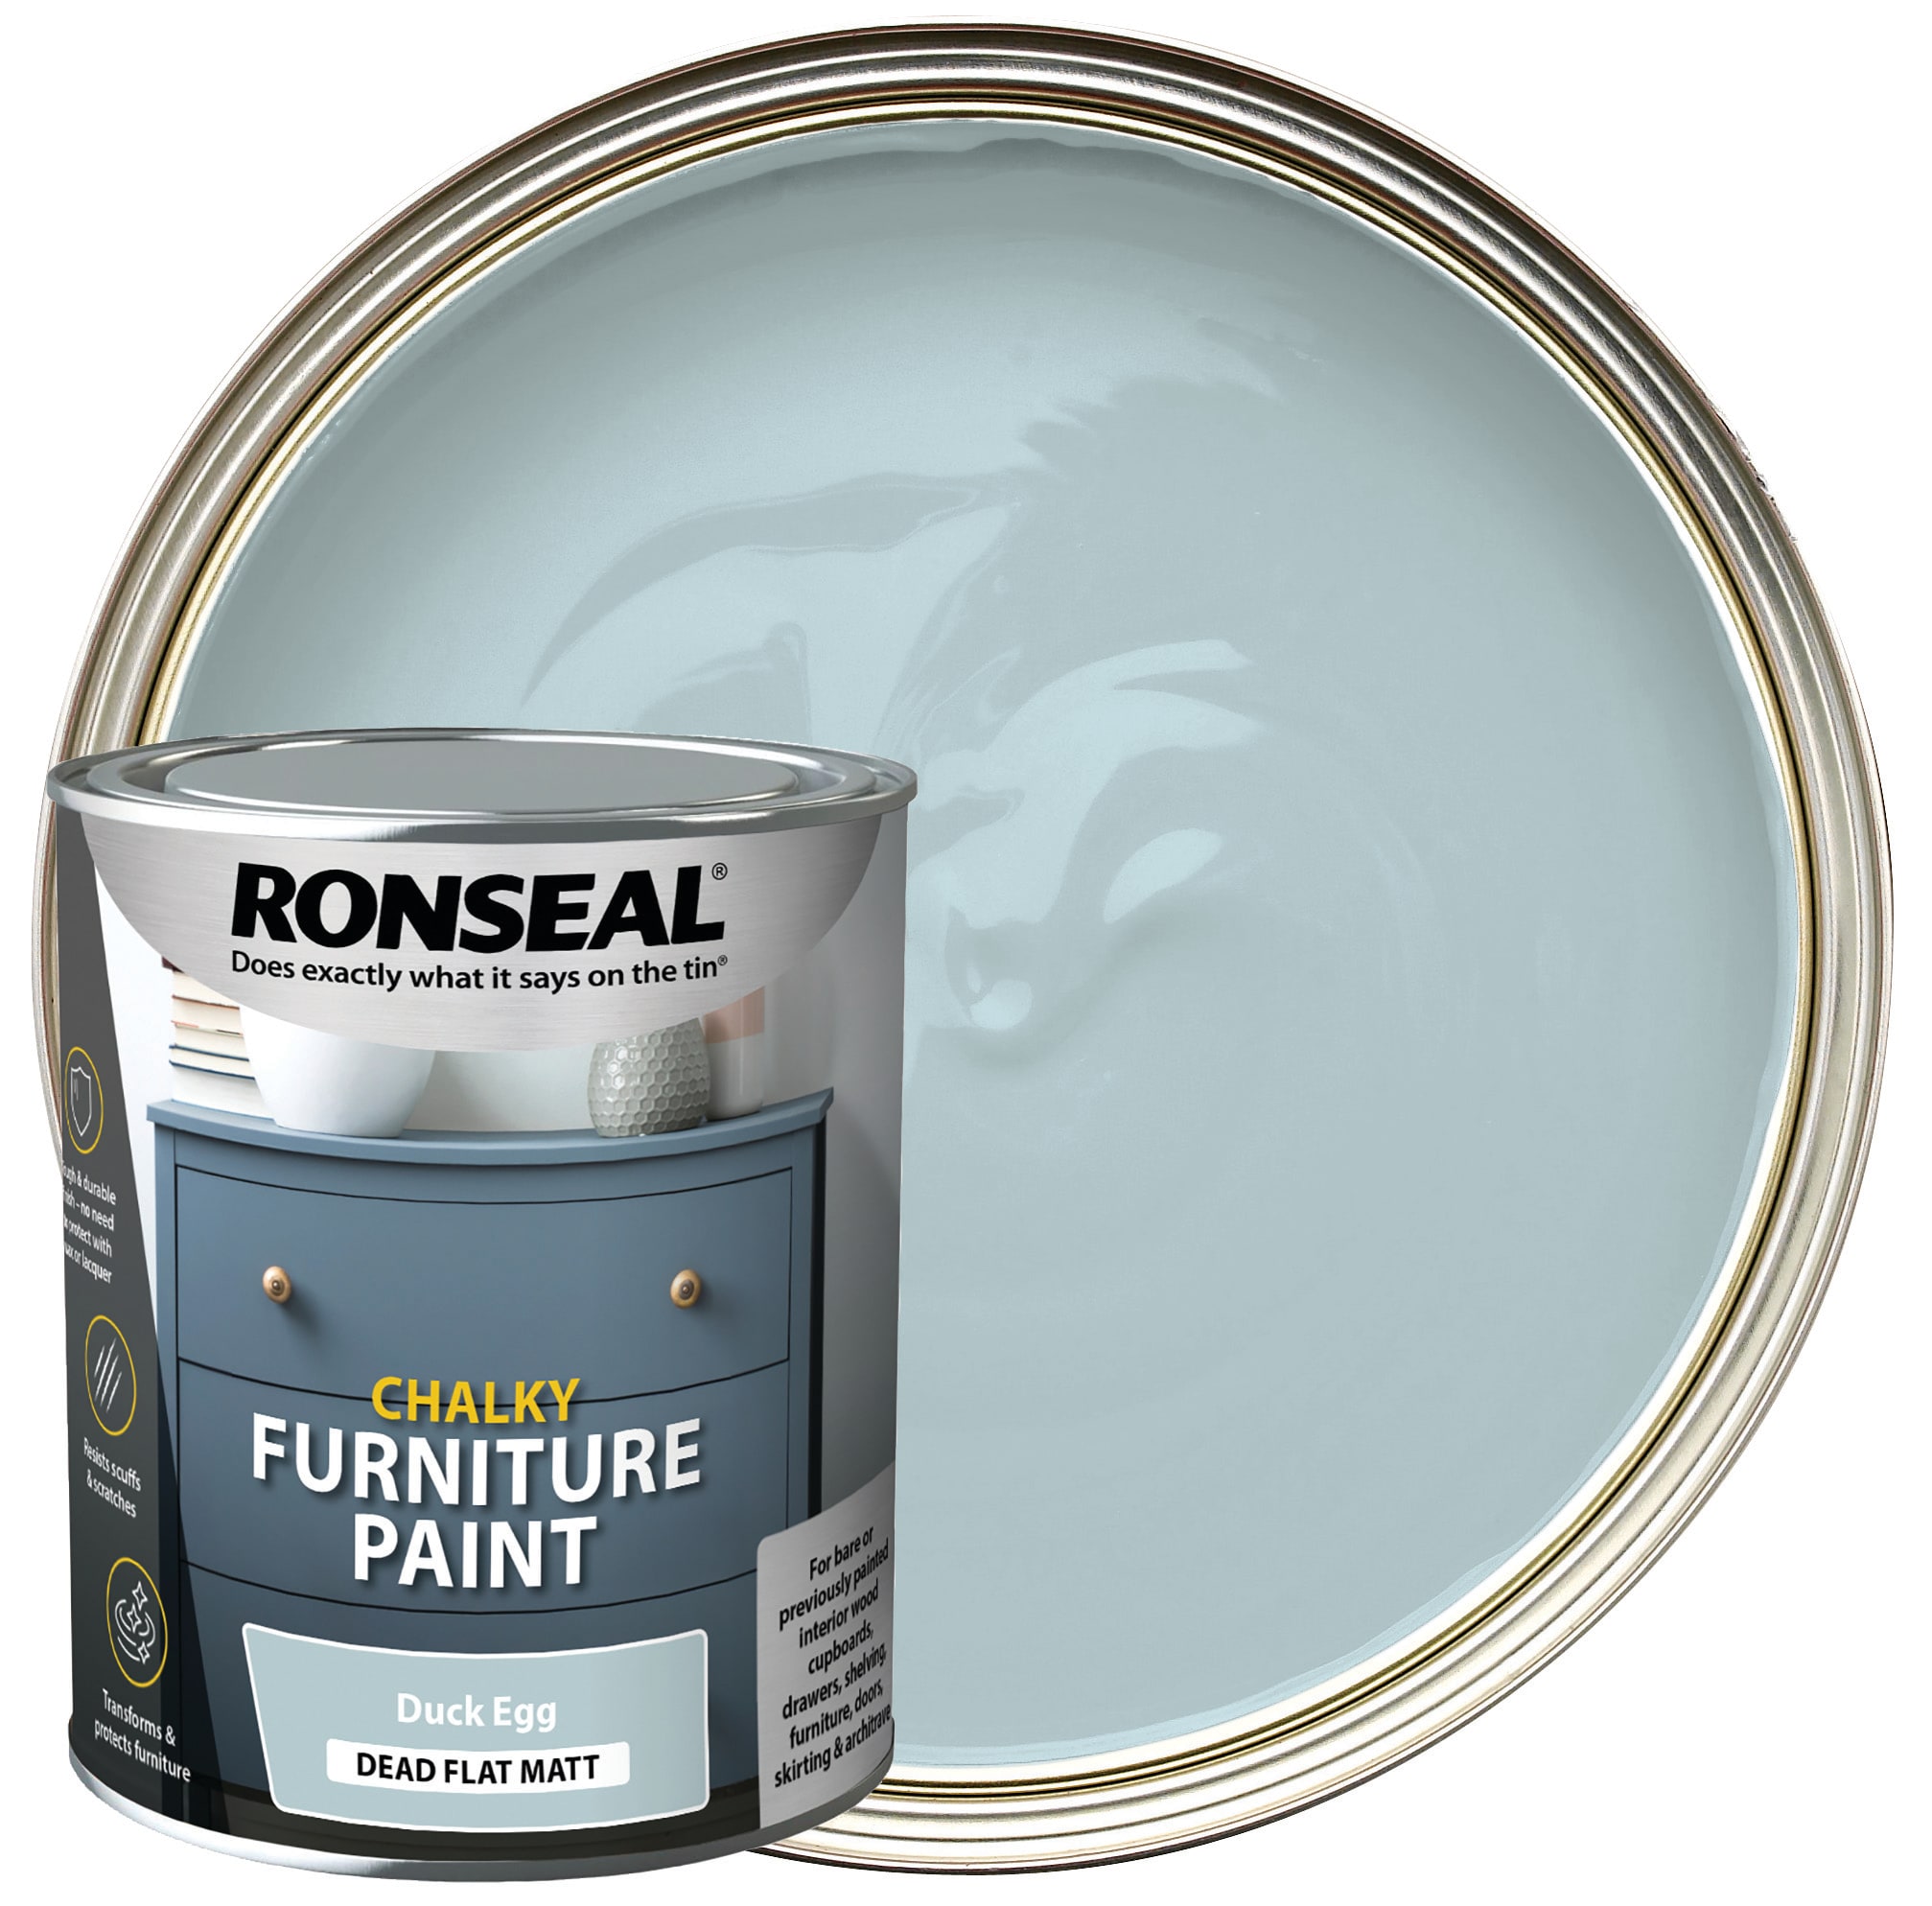 Ronseal Chalky Furniture Paint - Duck Egg -